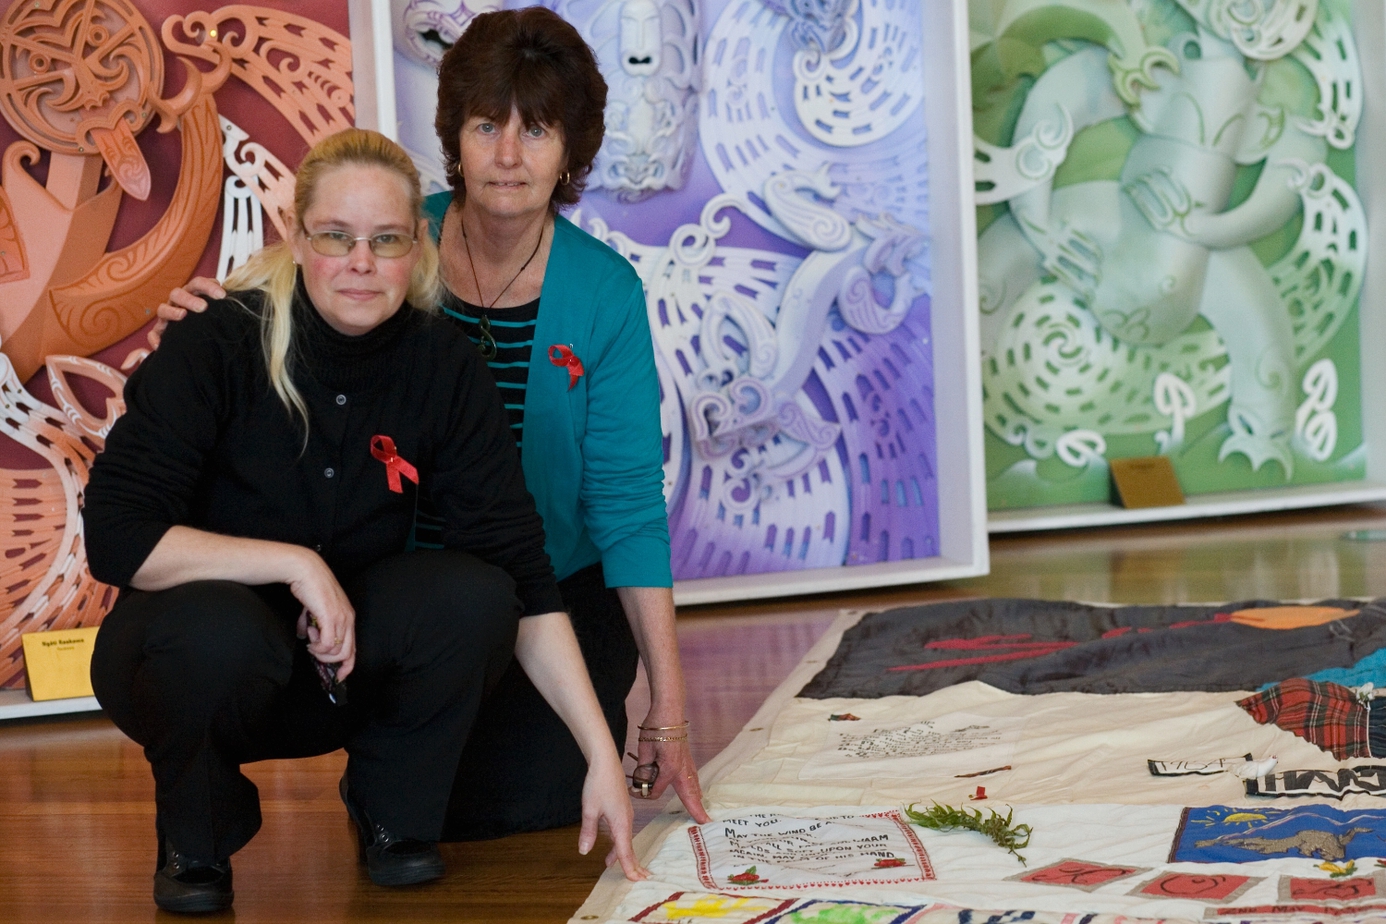 Two women pose with a panel of the New Zealand AIDS Memorial Quilt